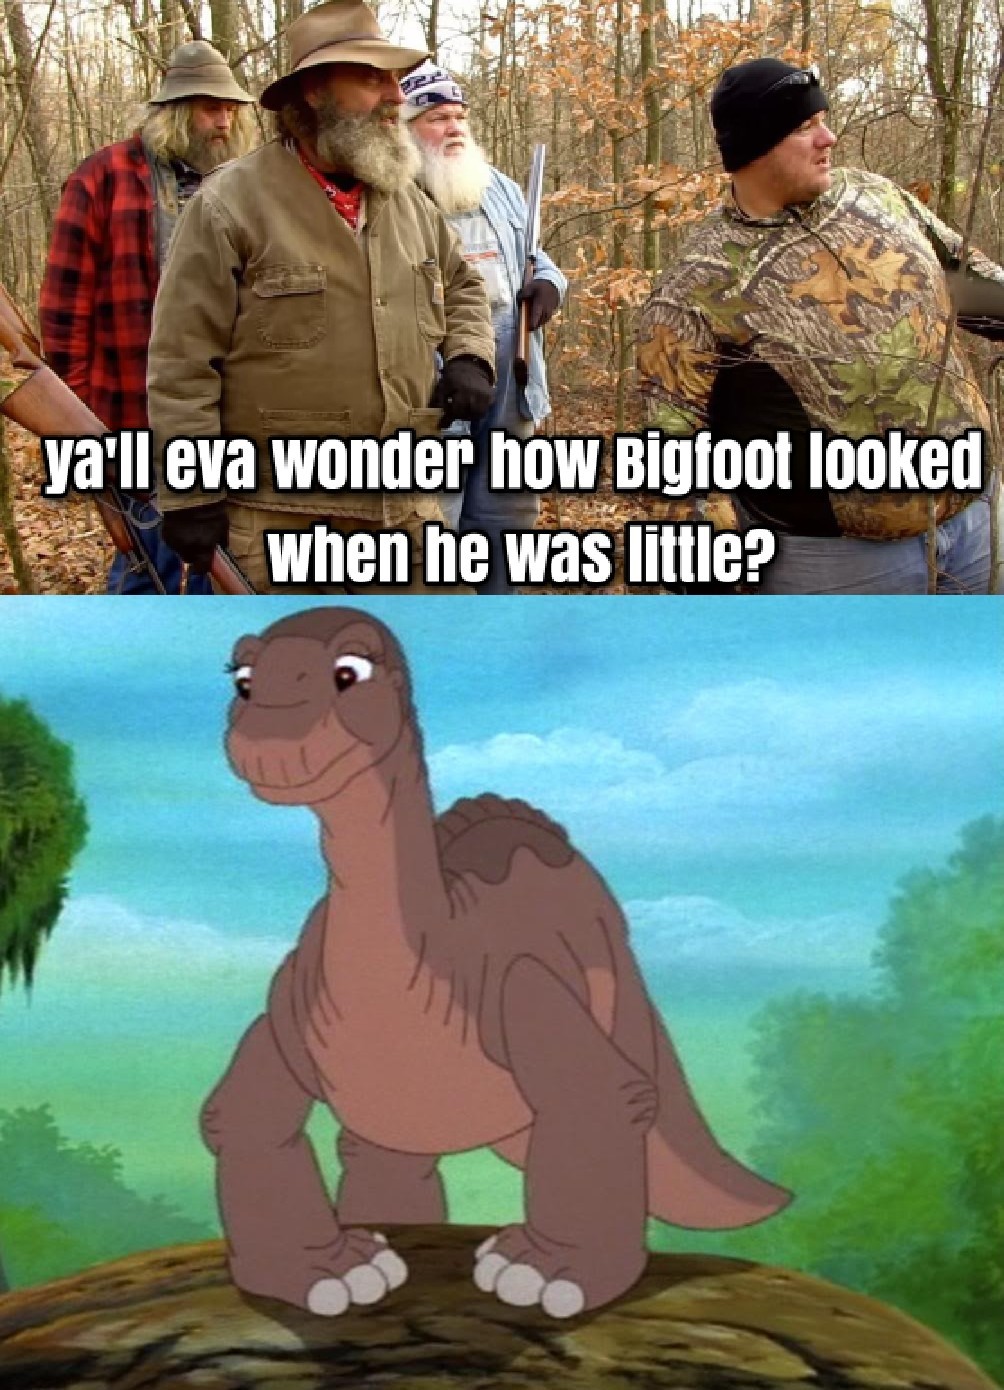 Land before time was the shit - meme